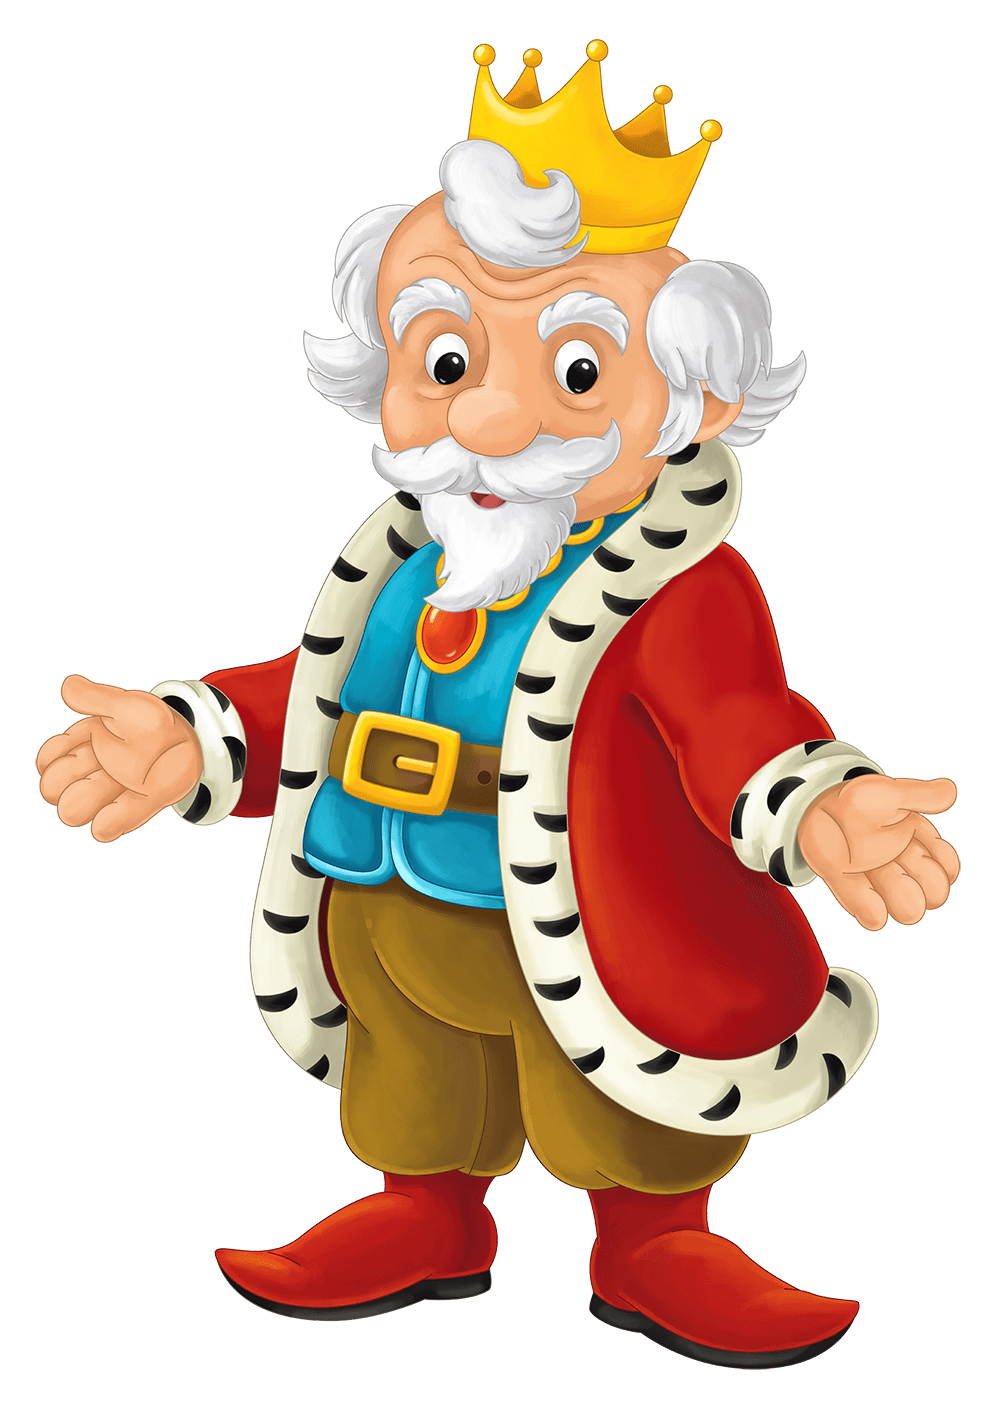 Old King Cole | Kids Video Song with FREE Lyrics & Activities!